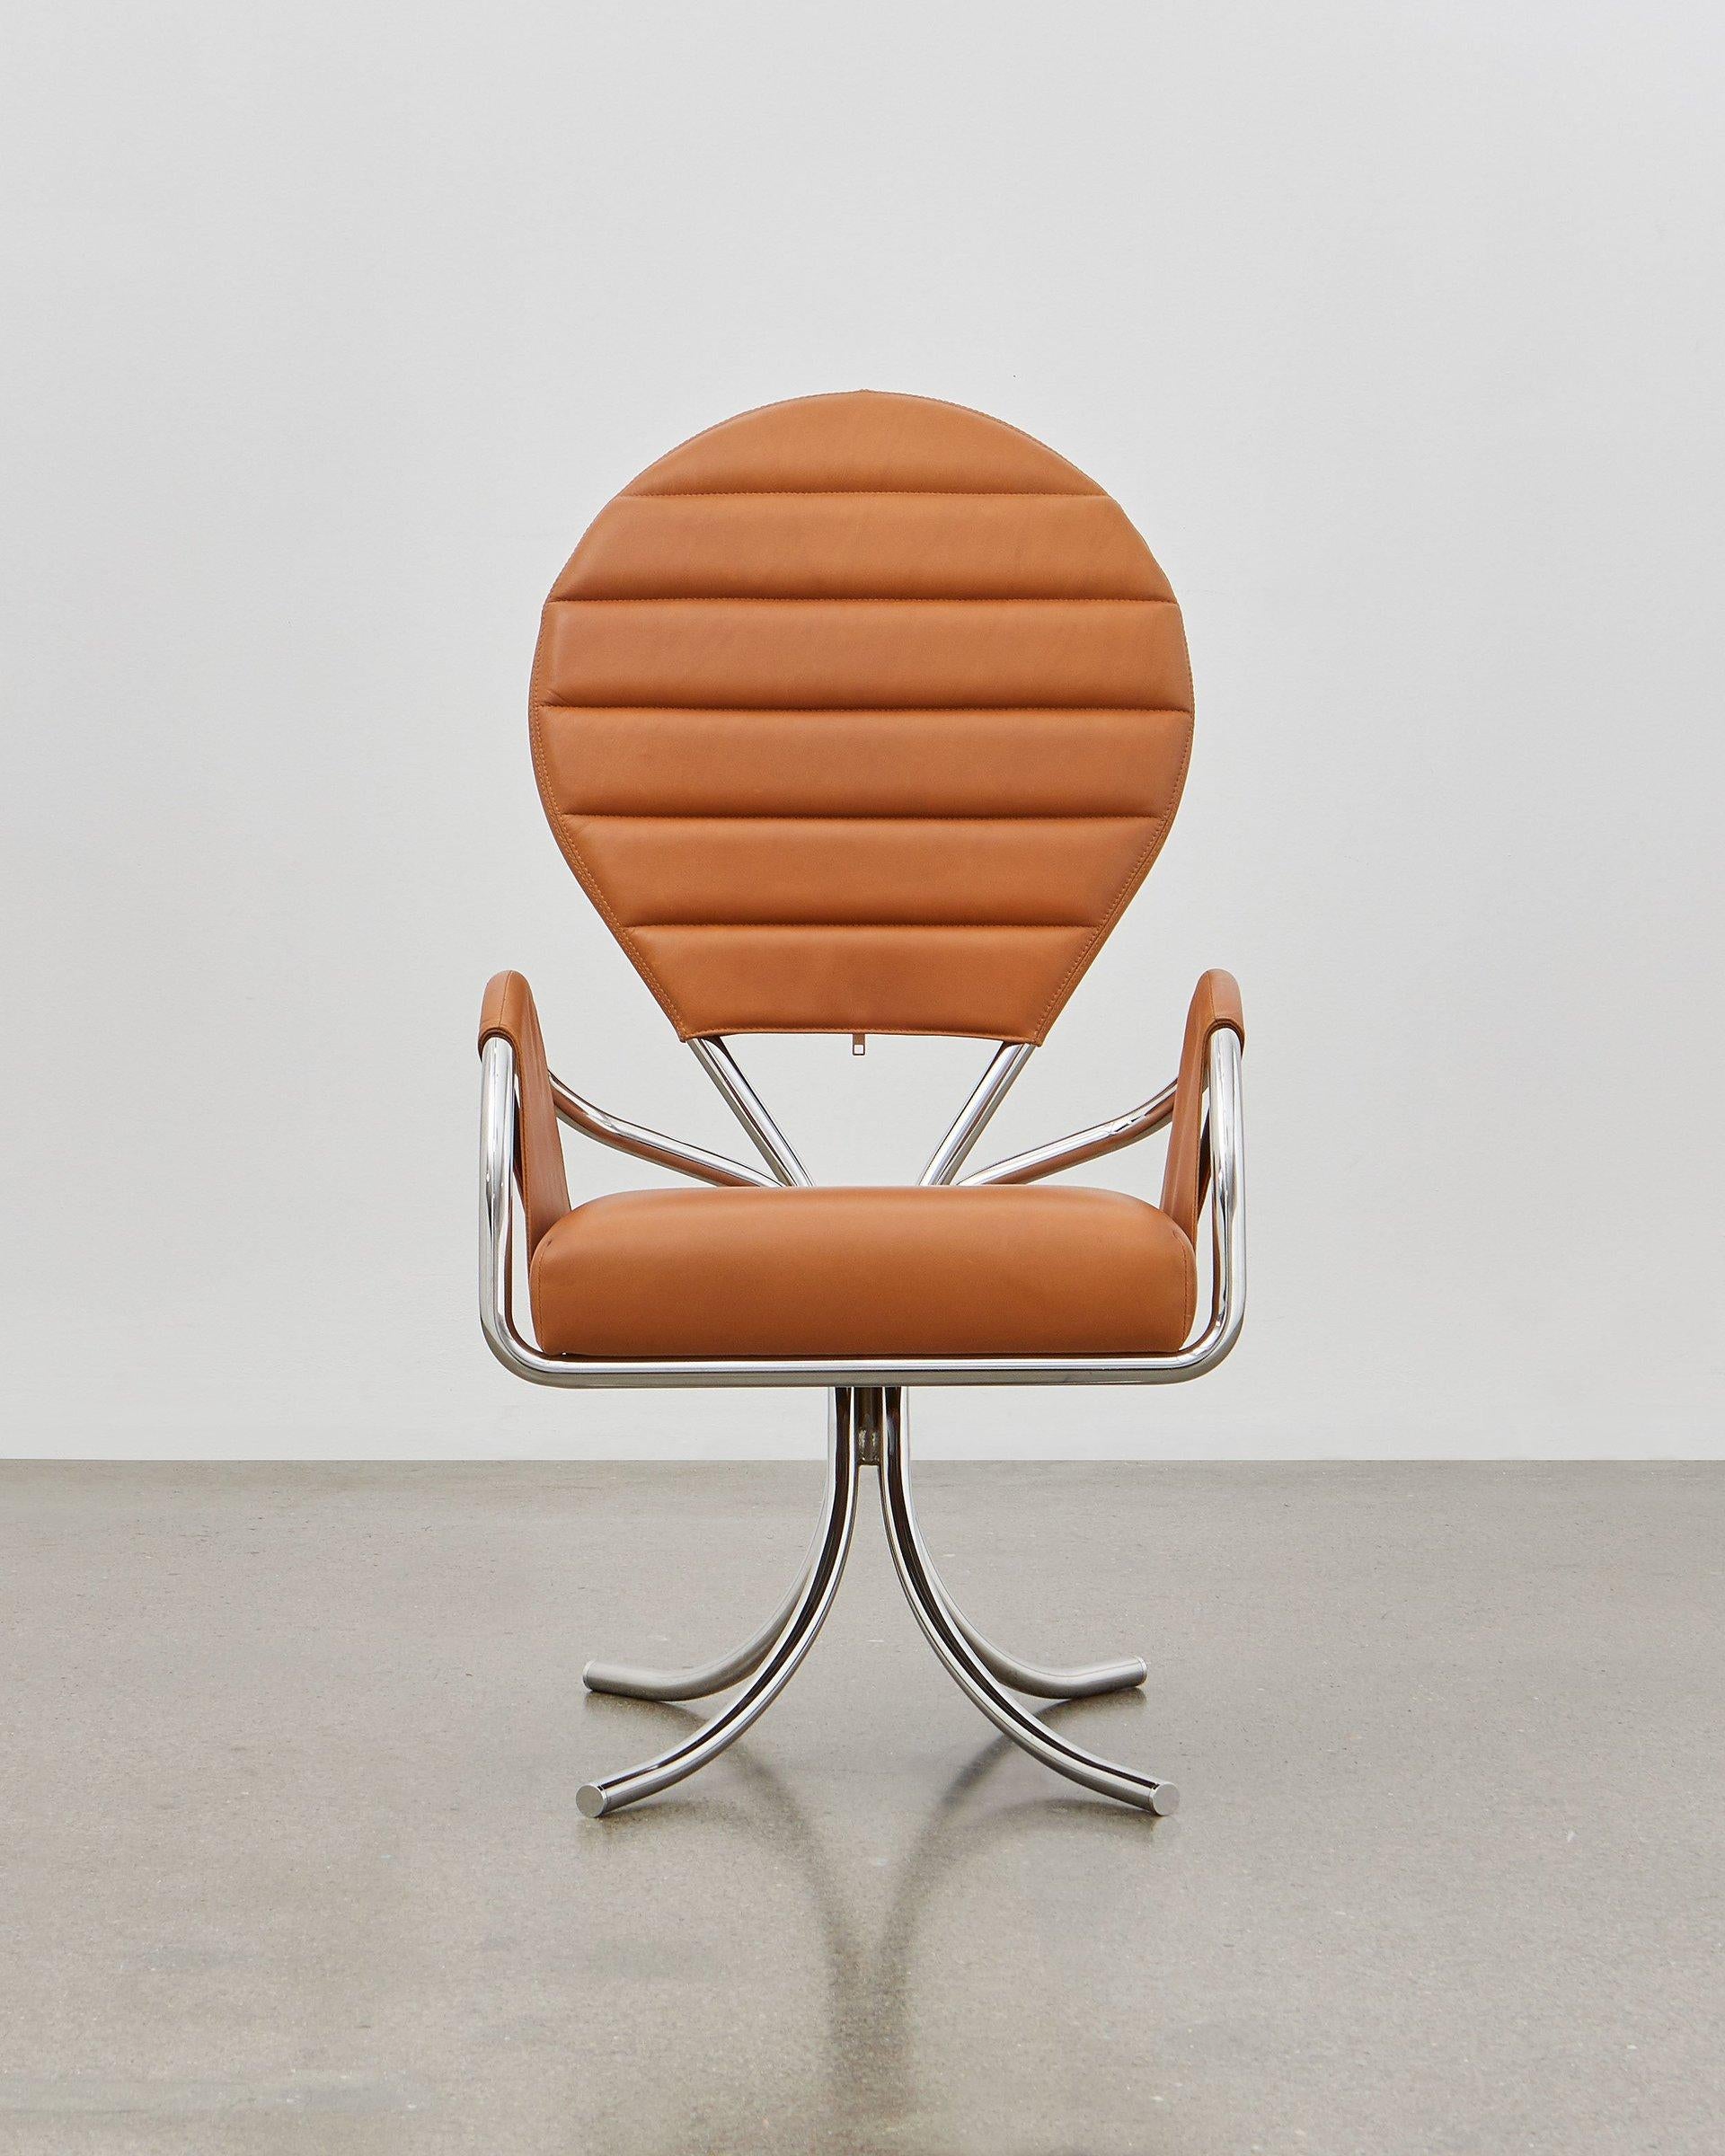 The traditional pope’s hat provided the inspiration for the shape of the chairs back, which is noted for its superior support and comfort.

The pope chair is designed in 1932 and is a clear statement that fits so well into all settings, whether it